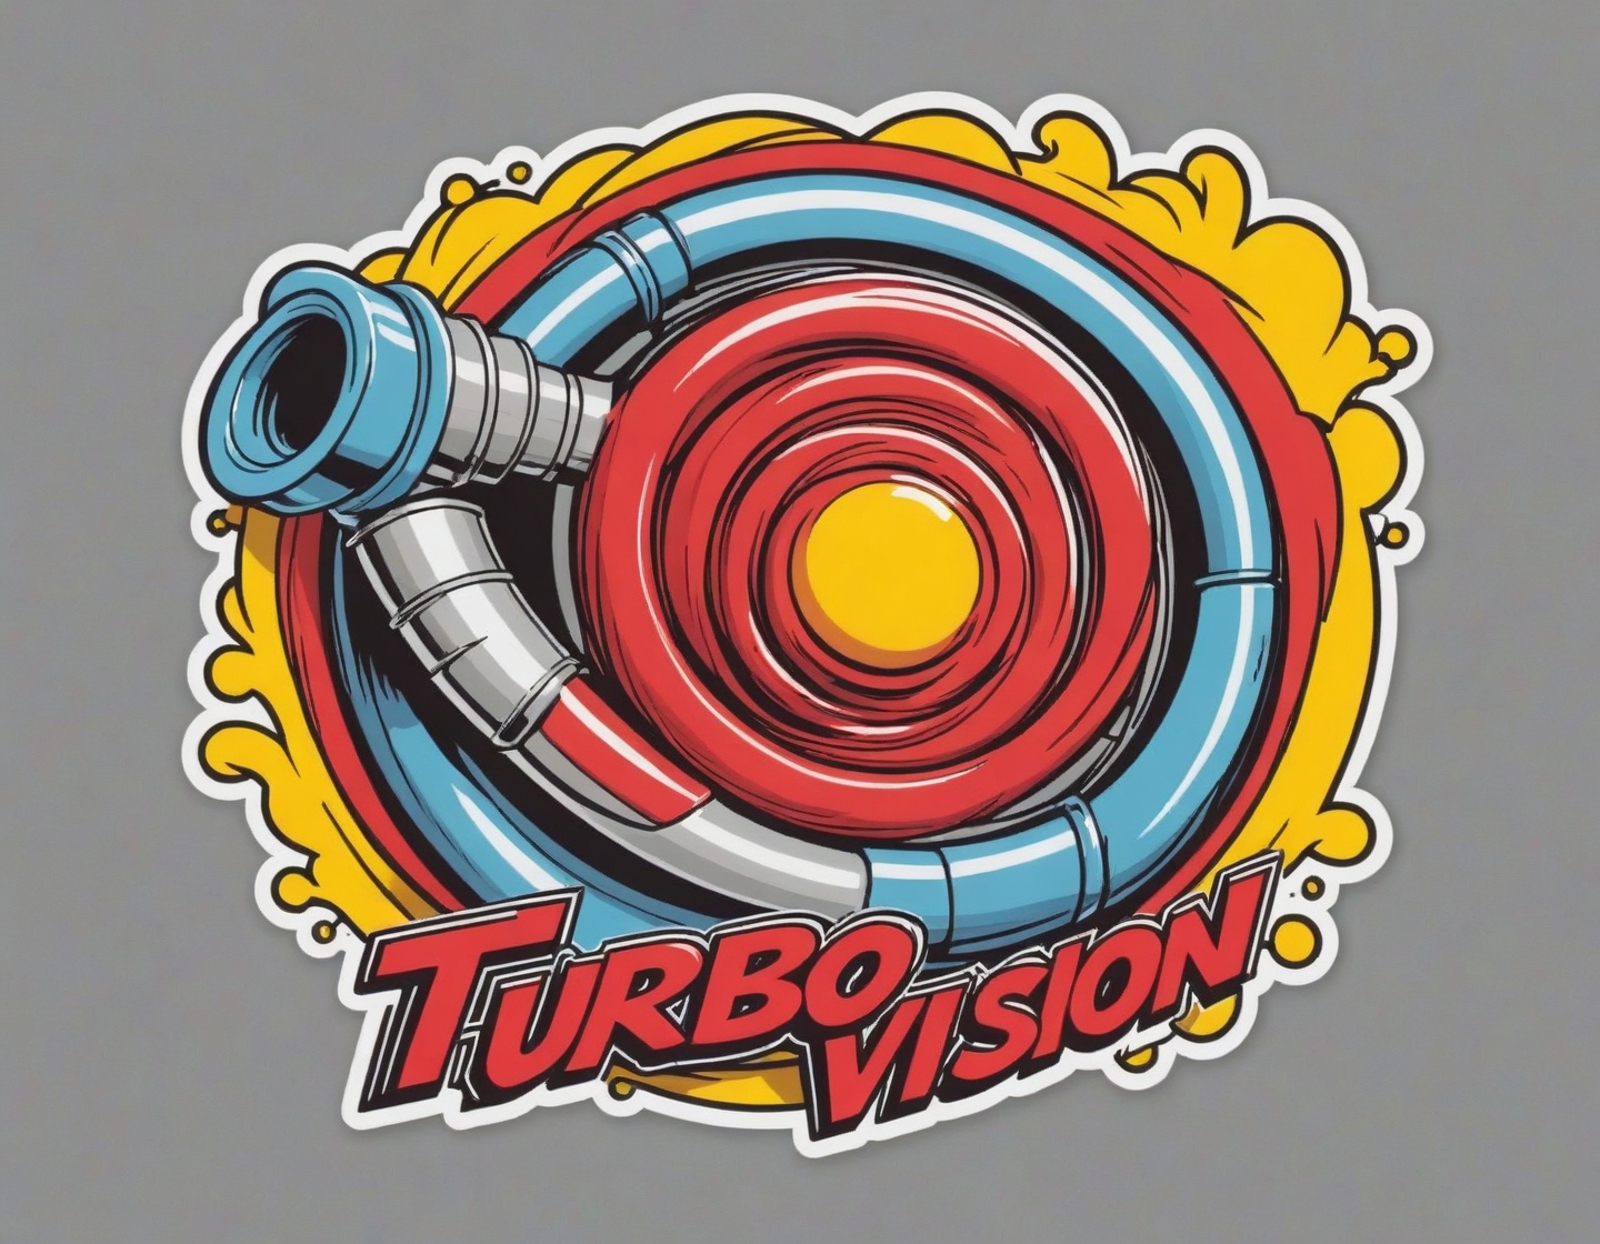 Turbo Vision Sticker with a Fire Hydrant and Pipe Design